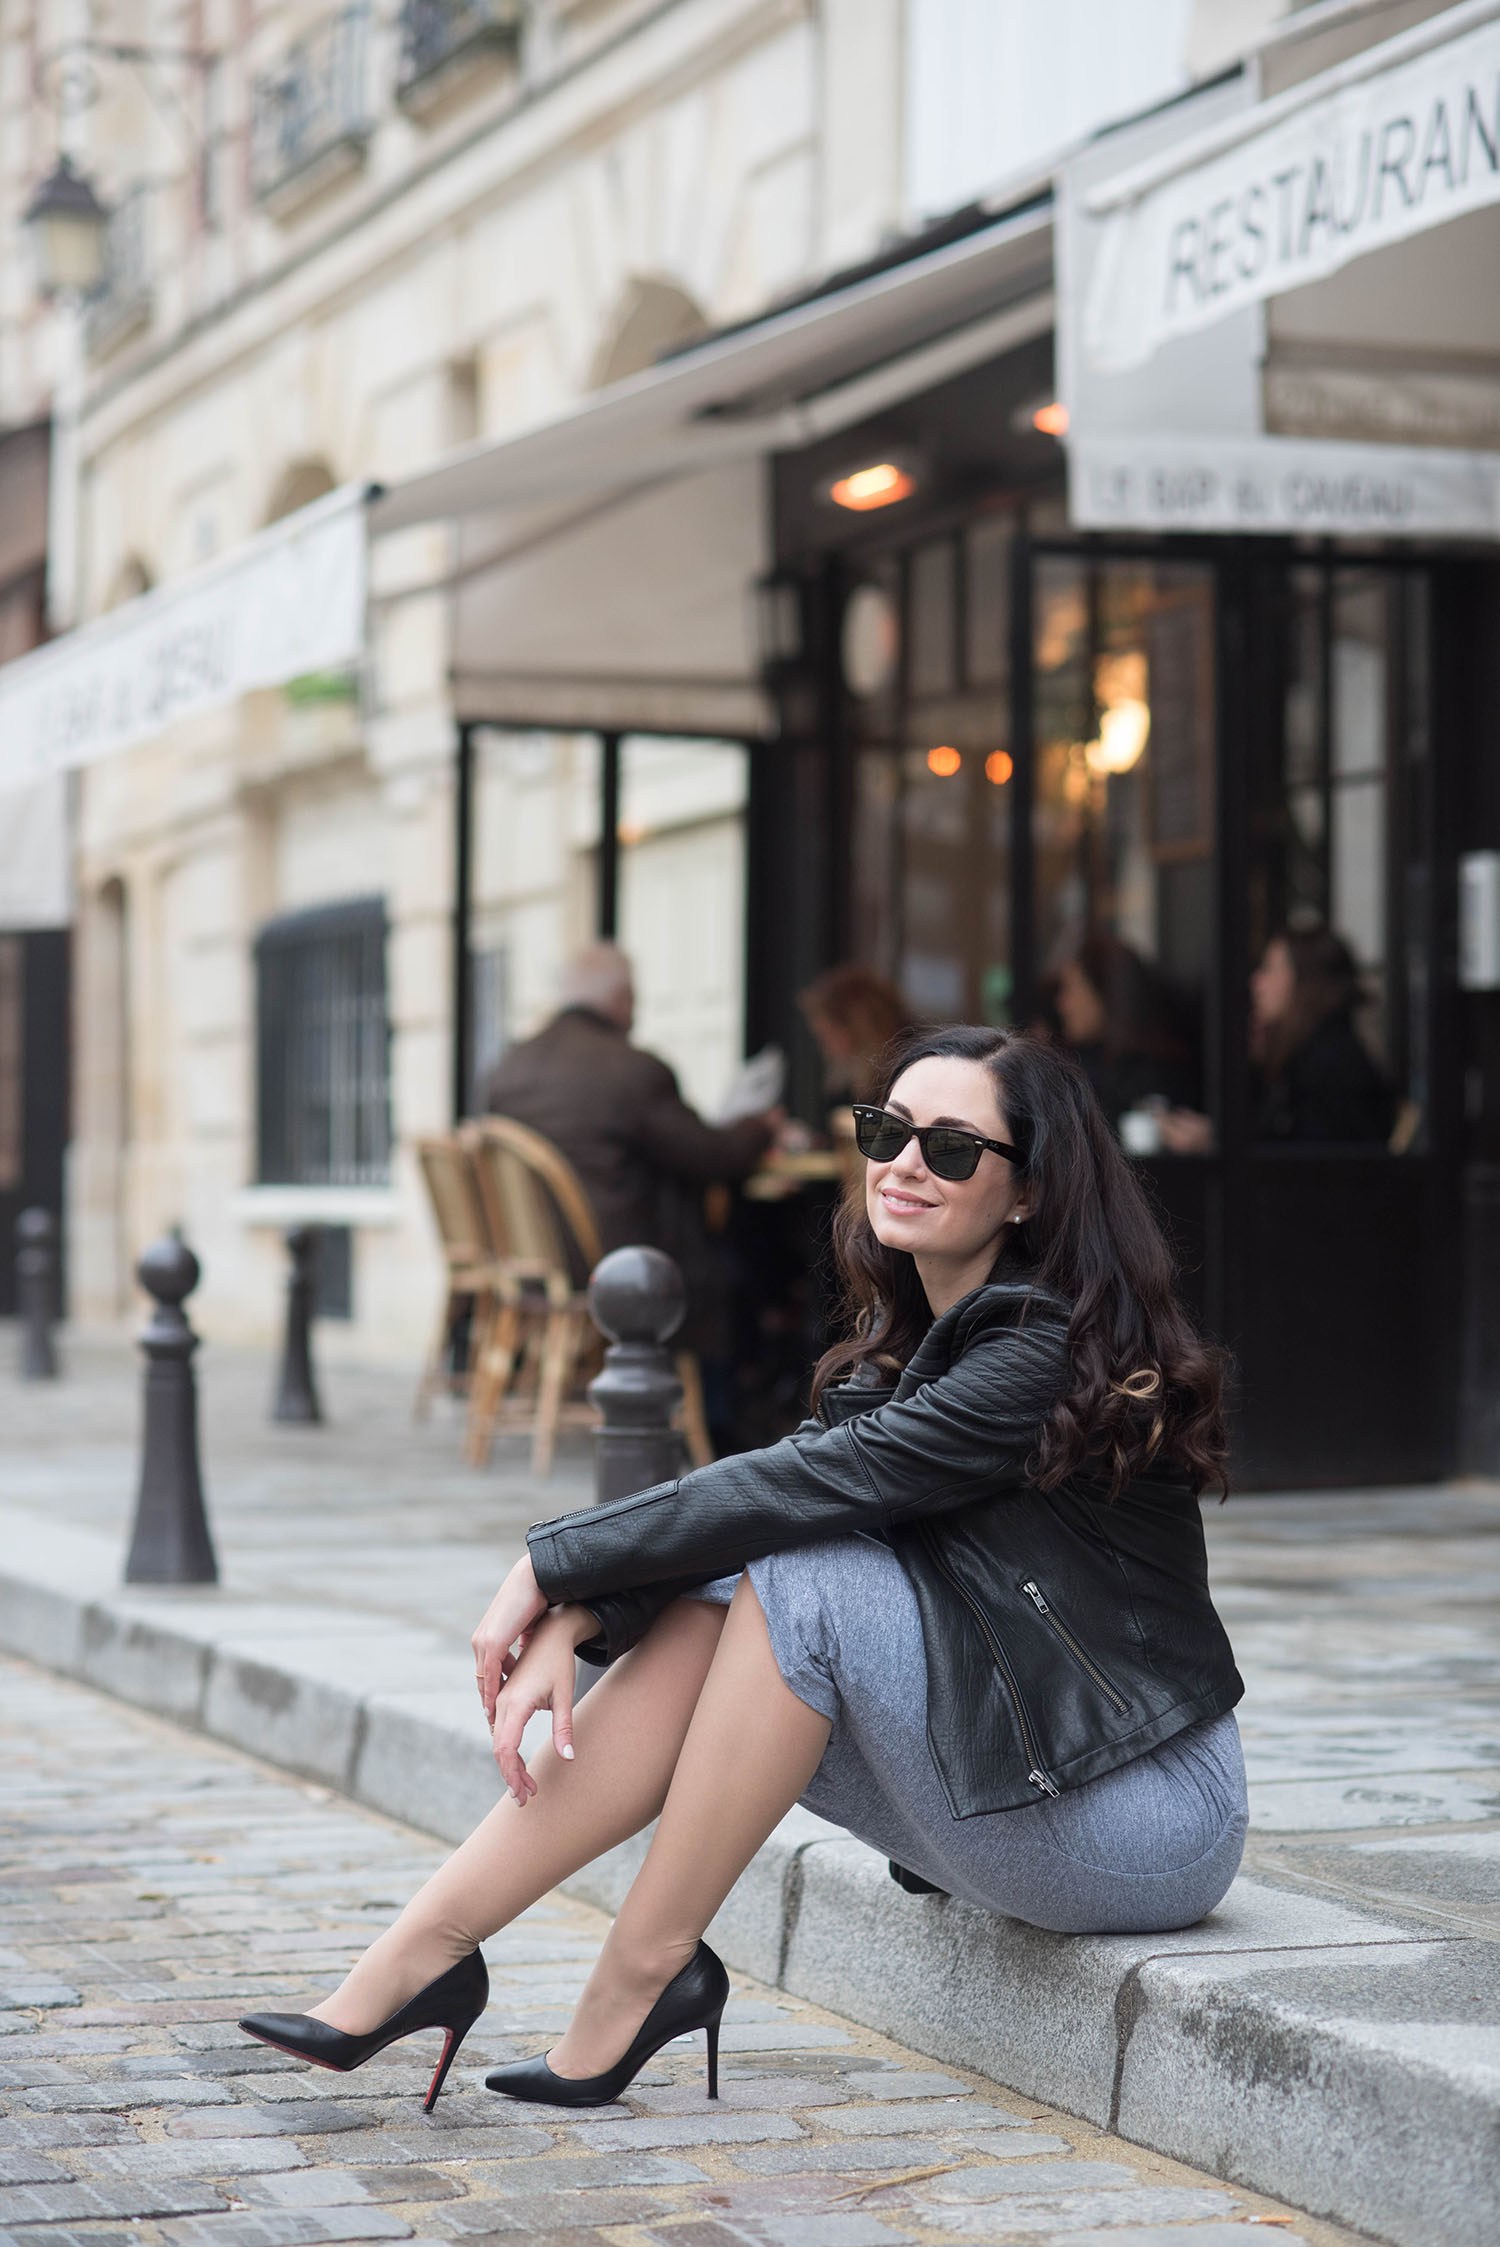 Top Winnipeg fashion blogger Cee Fardoe of Coco & Vera sits at Place Dauphine wearing Christian Louboutin Pigalle pumps and a grey jersey dress